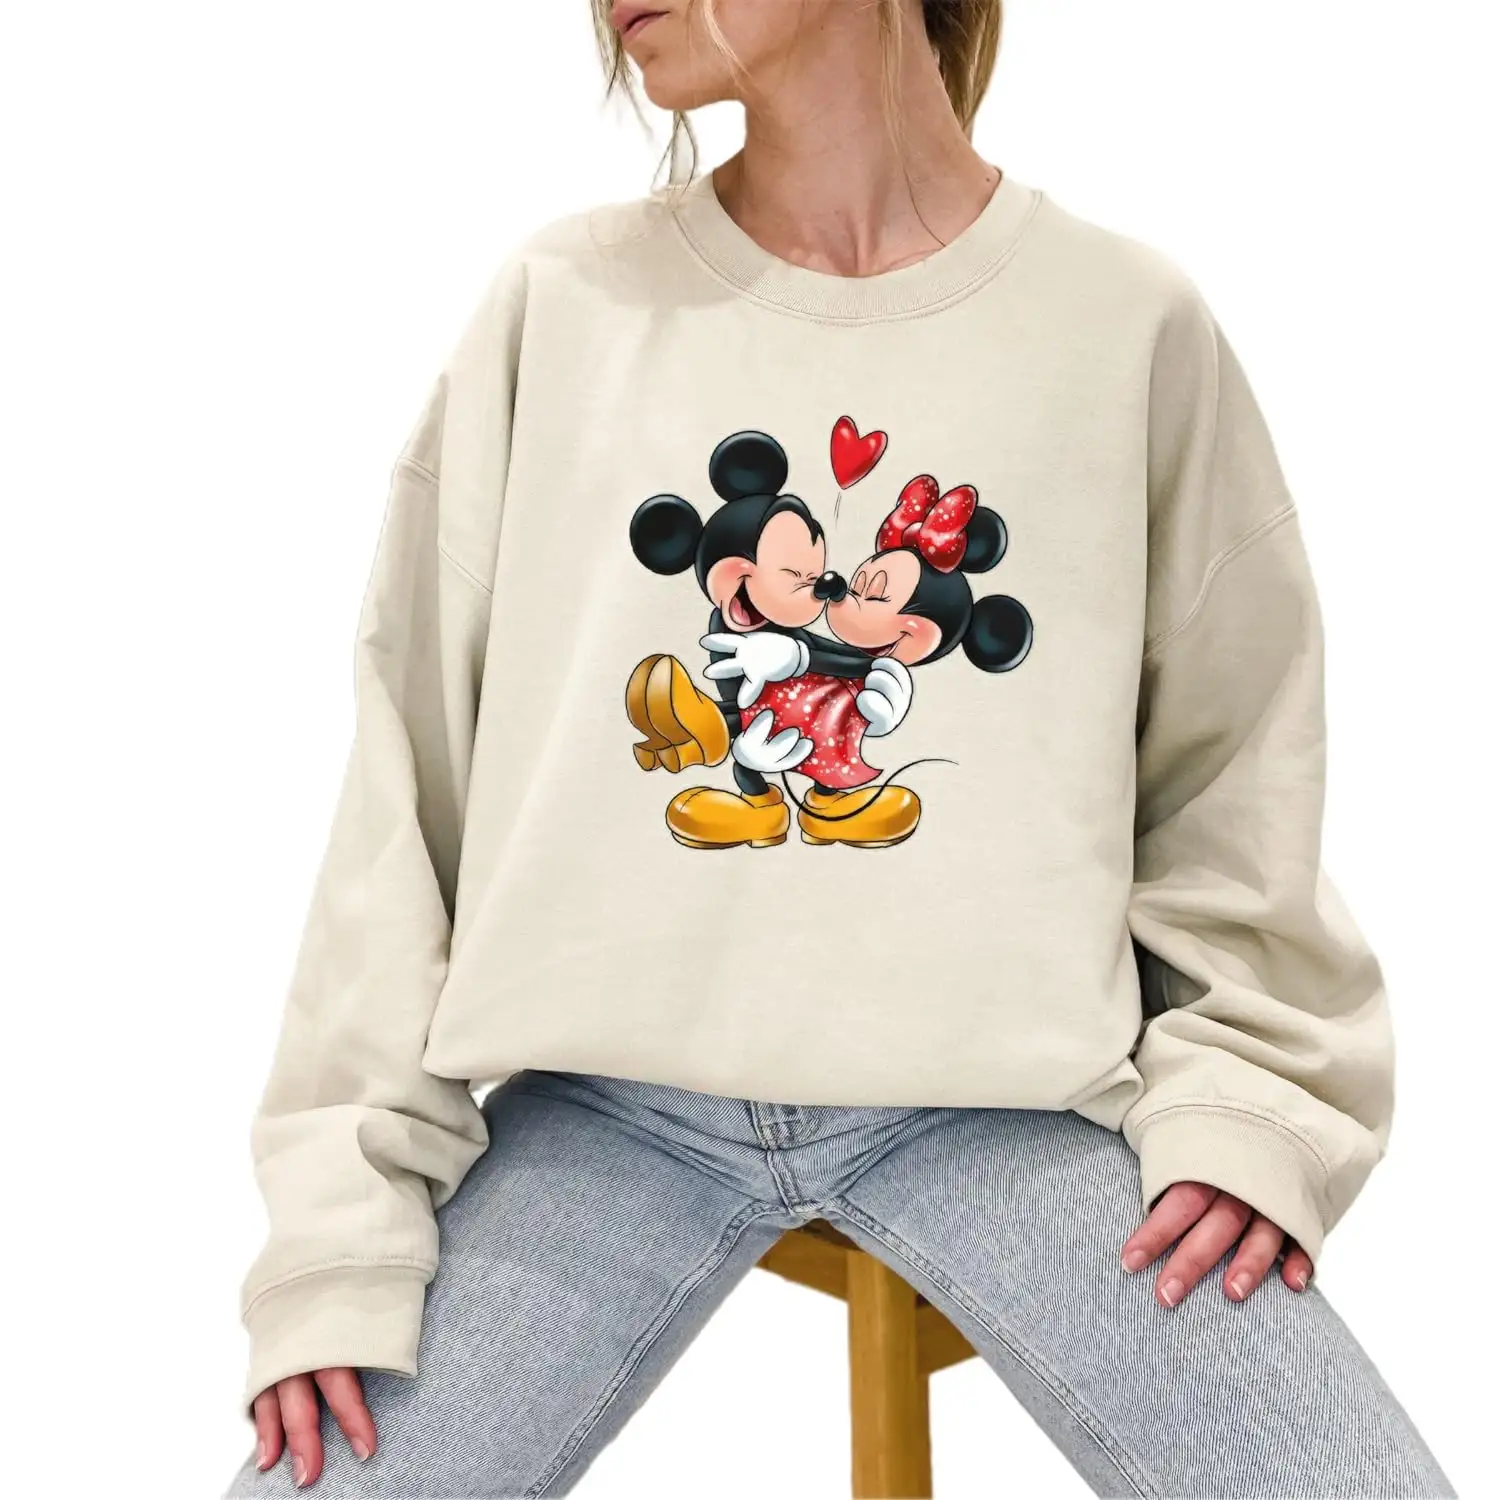 Valentine Matching Sweatshirts Valentine Mickey and Minnie Sweater Lovely Sweatshirt Pockets Casual for Women and Men Woven 2pcs